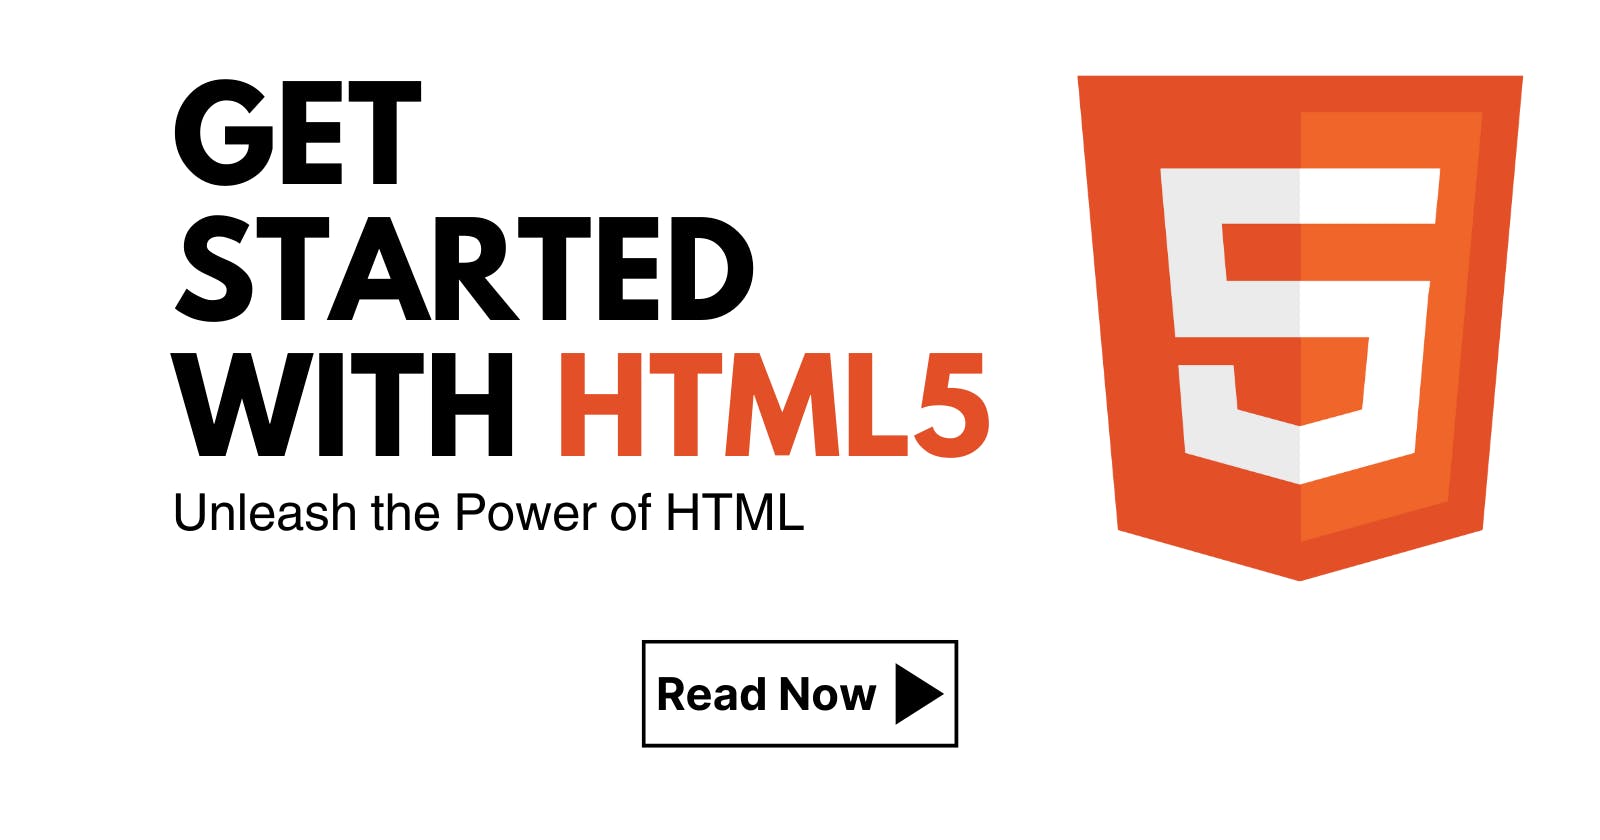 How to get started with HTML5?